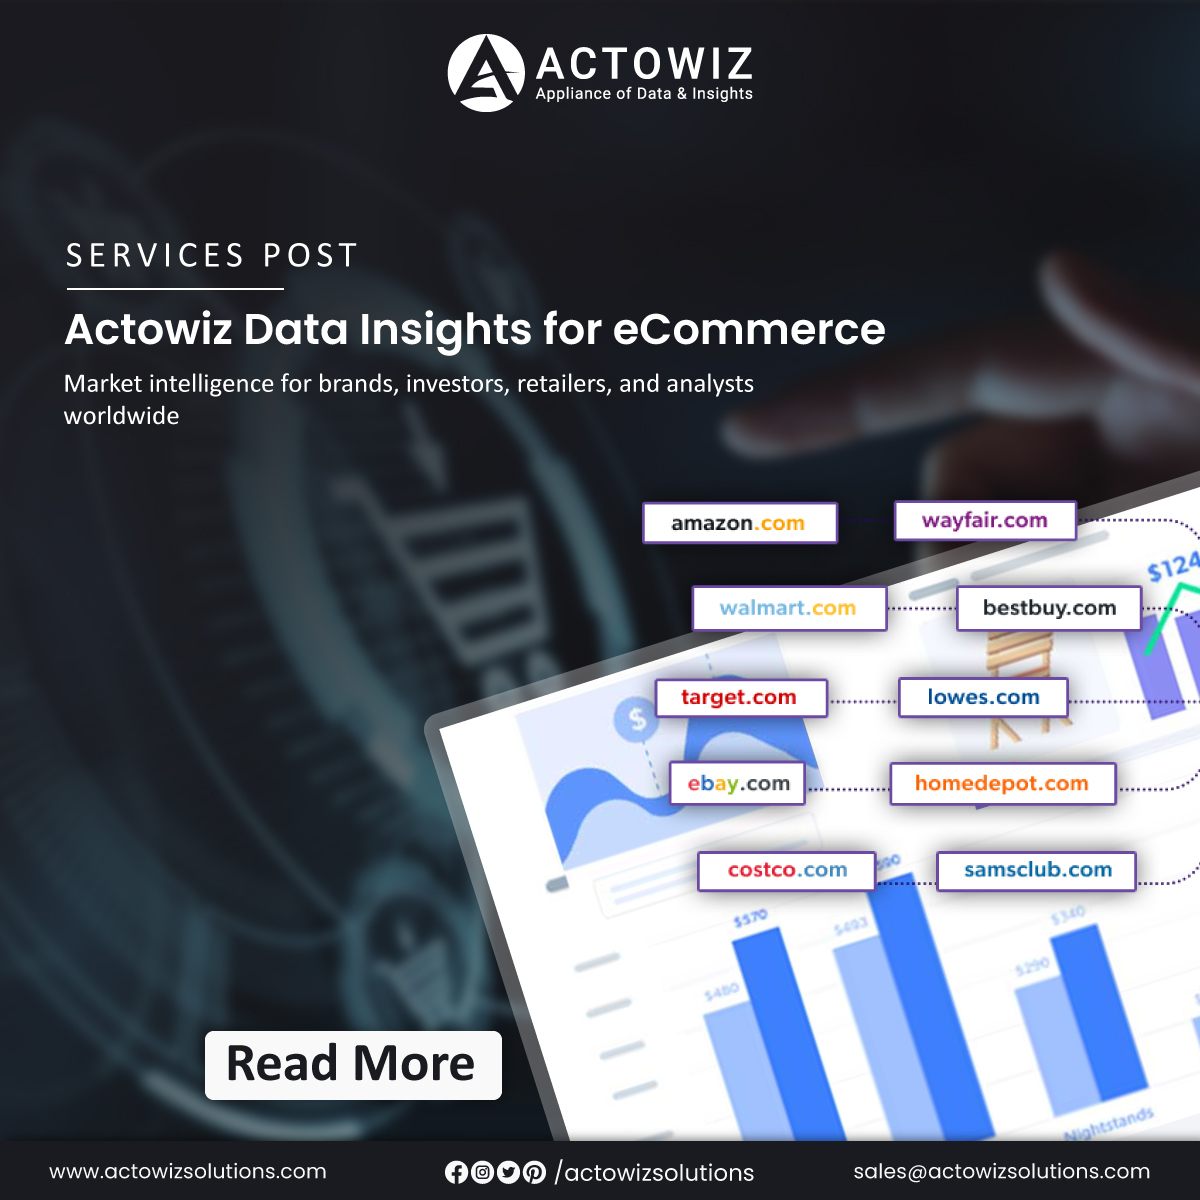 Actowiz Solutions provides actionable #dataanalysis for e-commerce for #retailers, #investors, and #analysts. 

>> actowizsolutions.com/actowiz-data-i…

#ActowizDataInsights #DataInsights #EcommerceAnalytics #ecommerceAnalyticsTools #DataAnalytics #bigdata #datamining #actowizsolutions #USA